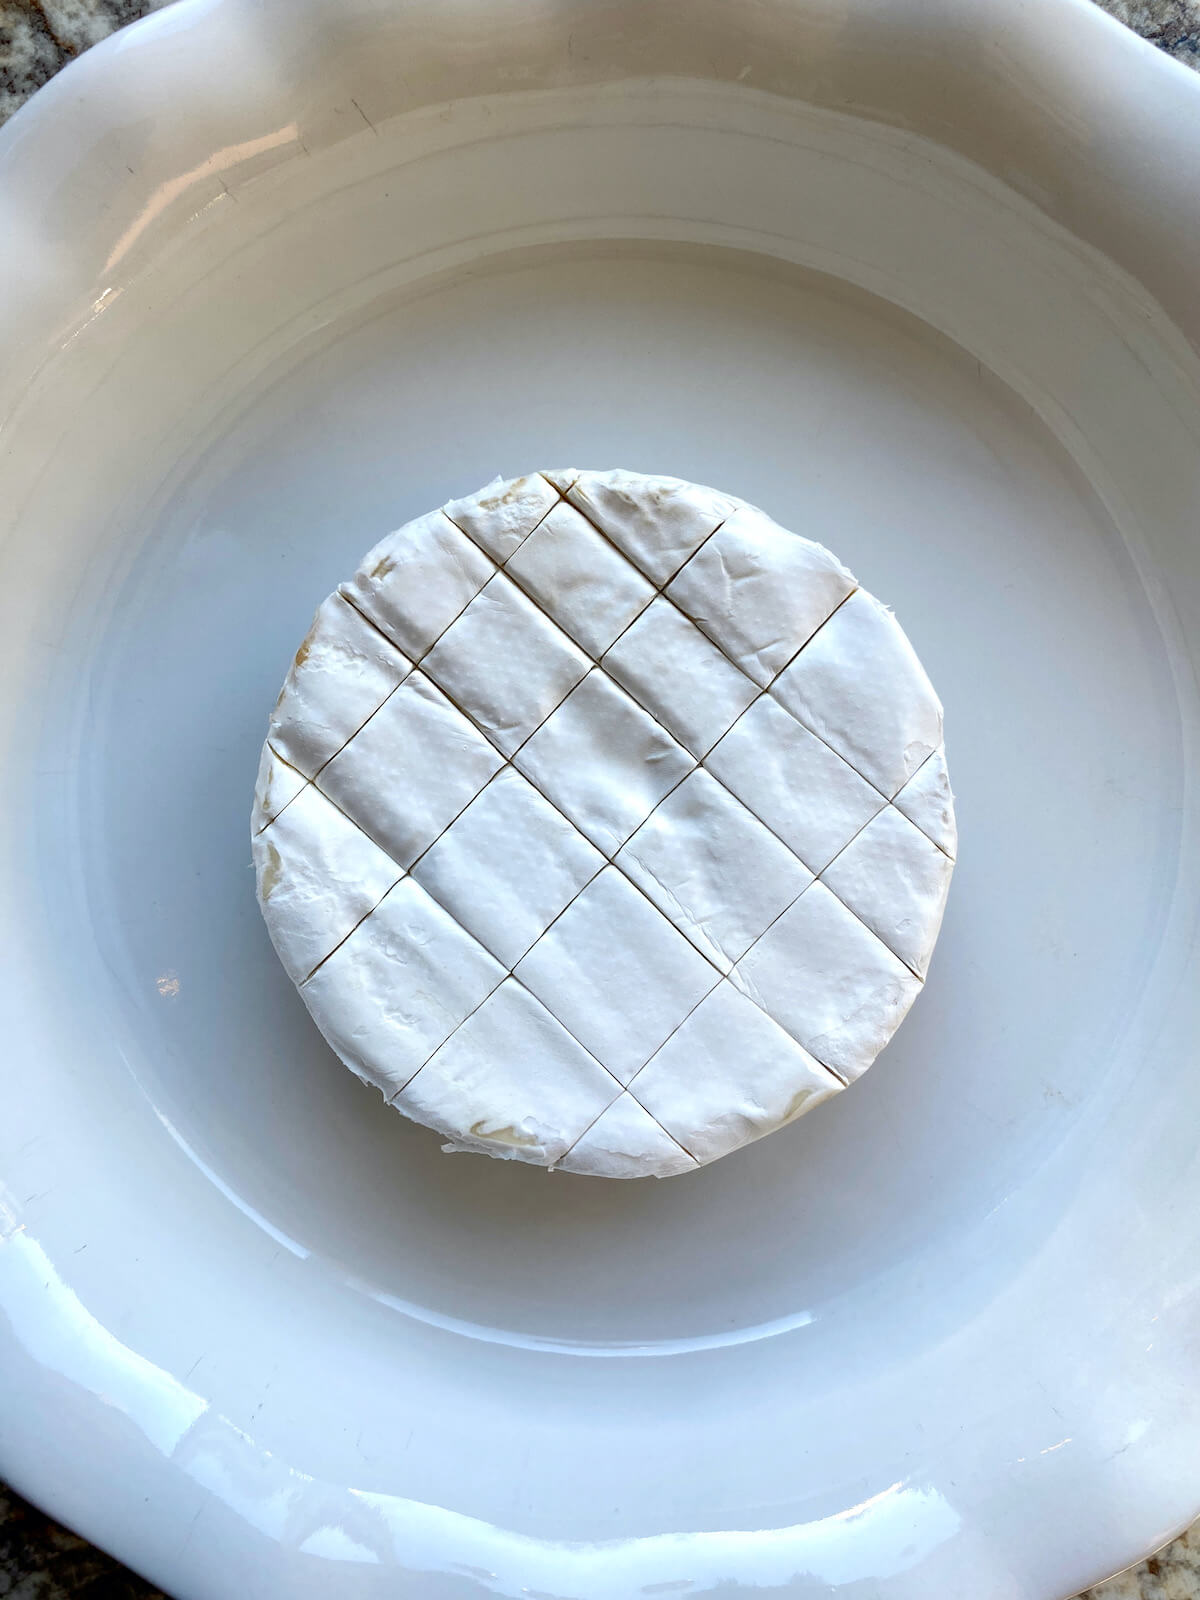 A wheel of Brie cheese with cuts through the top rind in a pie dish.